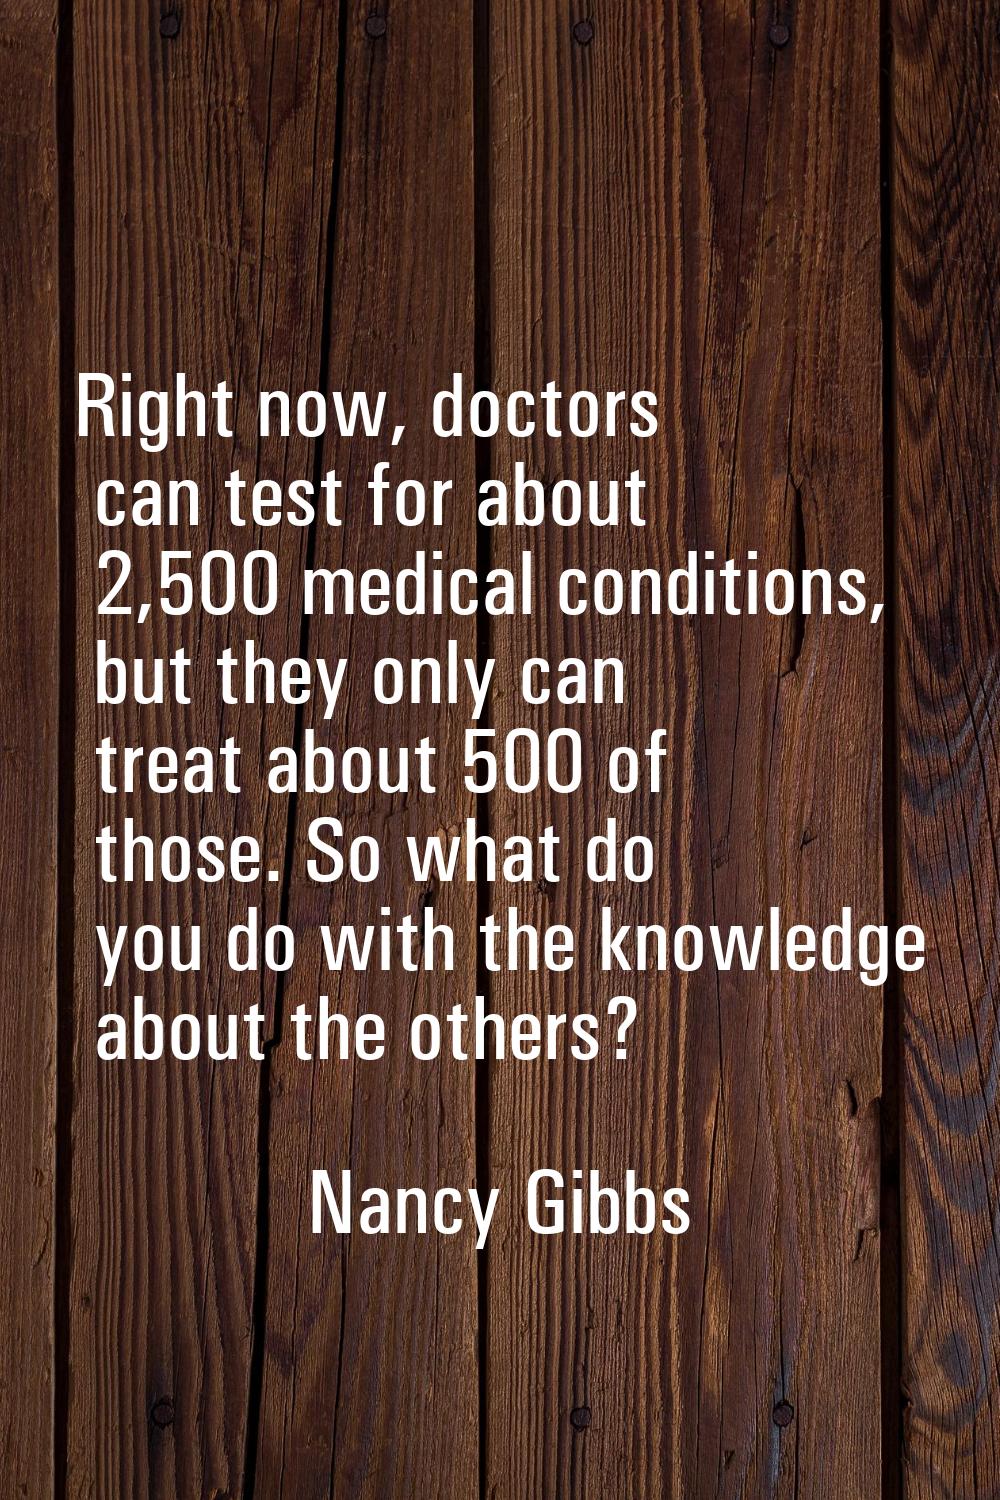 Right now, doctors can test for about 2,500 medical conditions, but they only can treat about 500 o